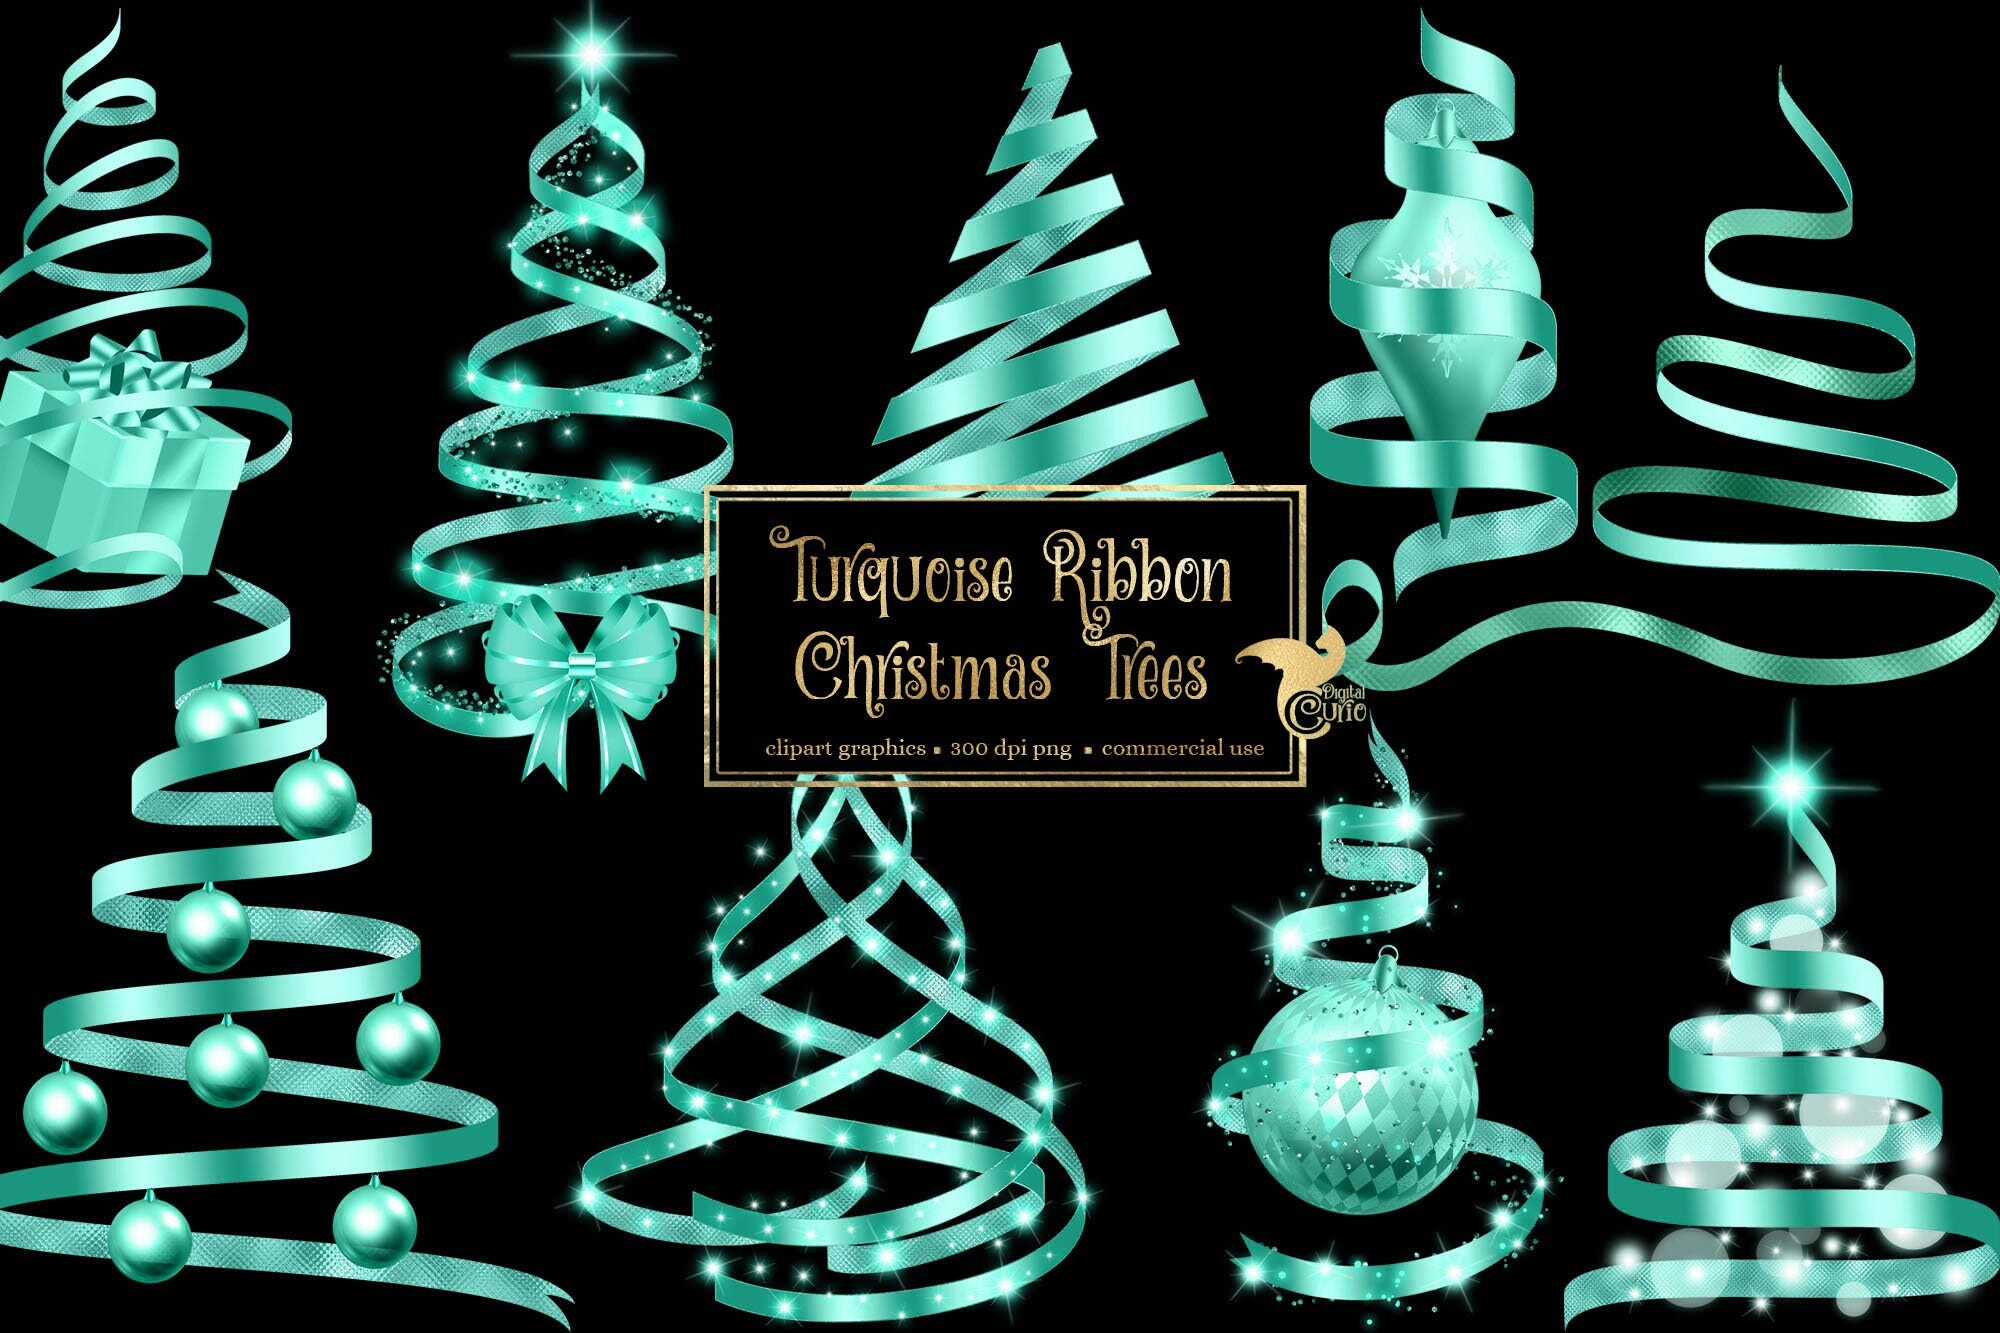 Turquoise Ribbon Christmas Tree Clip Art - digital holiday aqua glitter png graphics for instant download commercial use